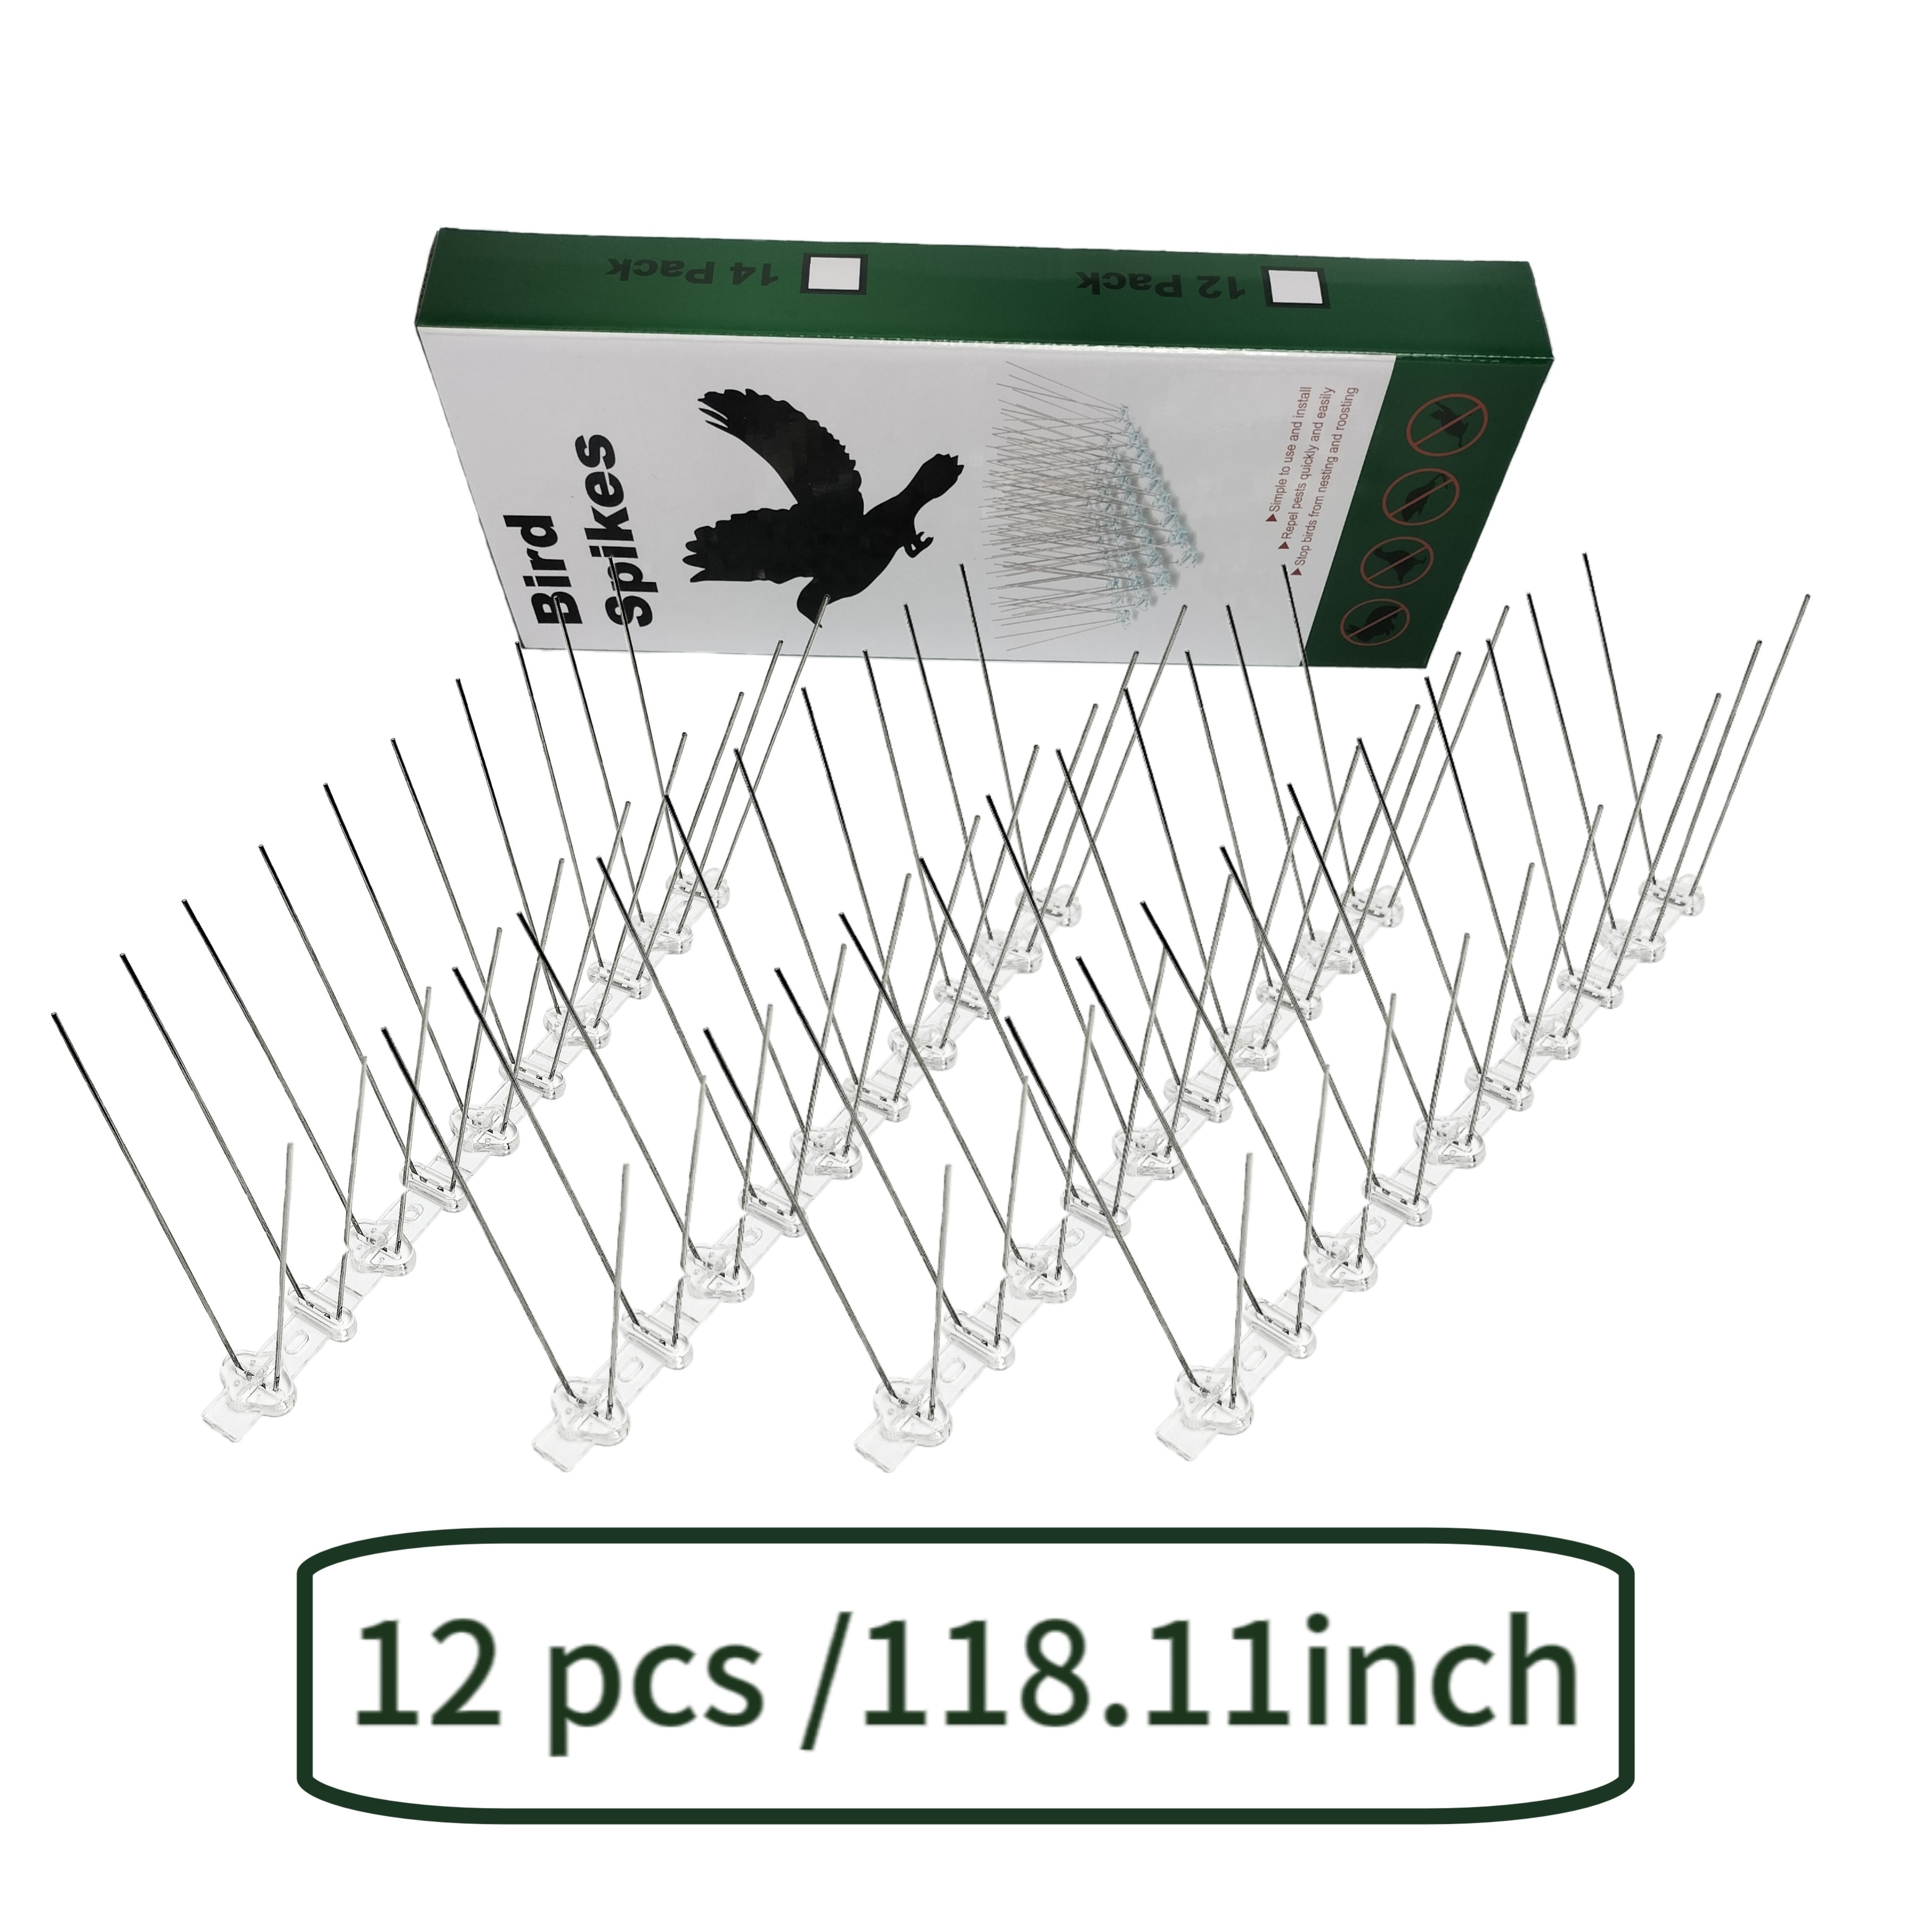 12 Packs, Bird Spikes Stainless Steel Anti Pigeons Deterrent Total  118.11inch Birds Repellent Anti Climb Security Wall Fence Away From Roof  Windowsill